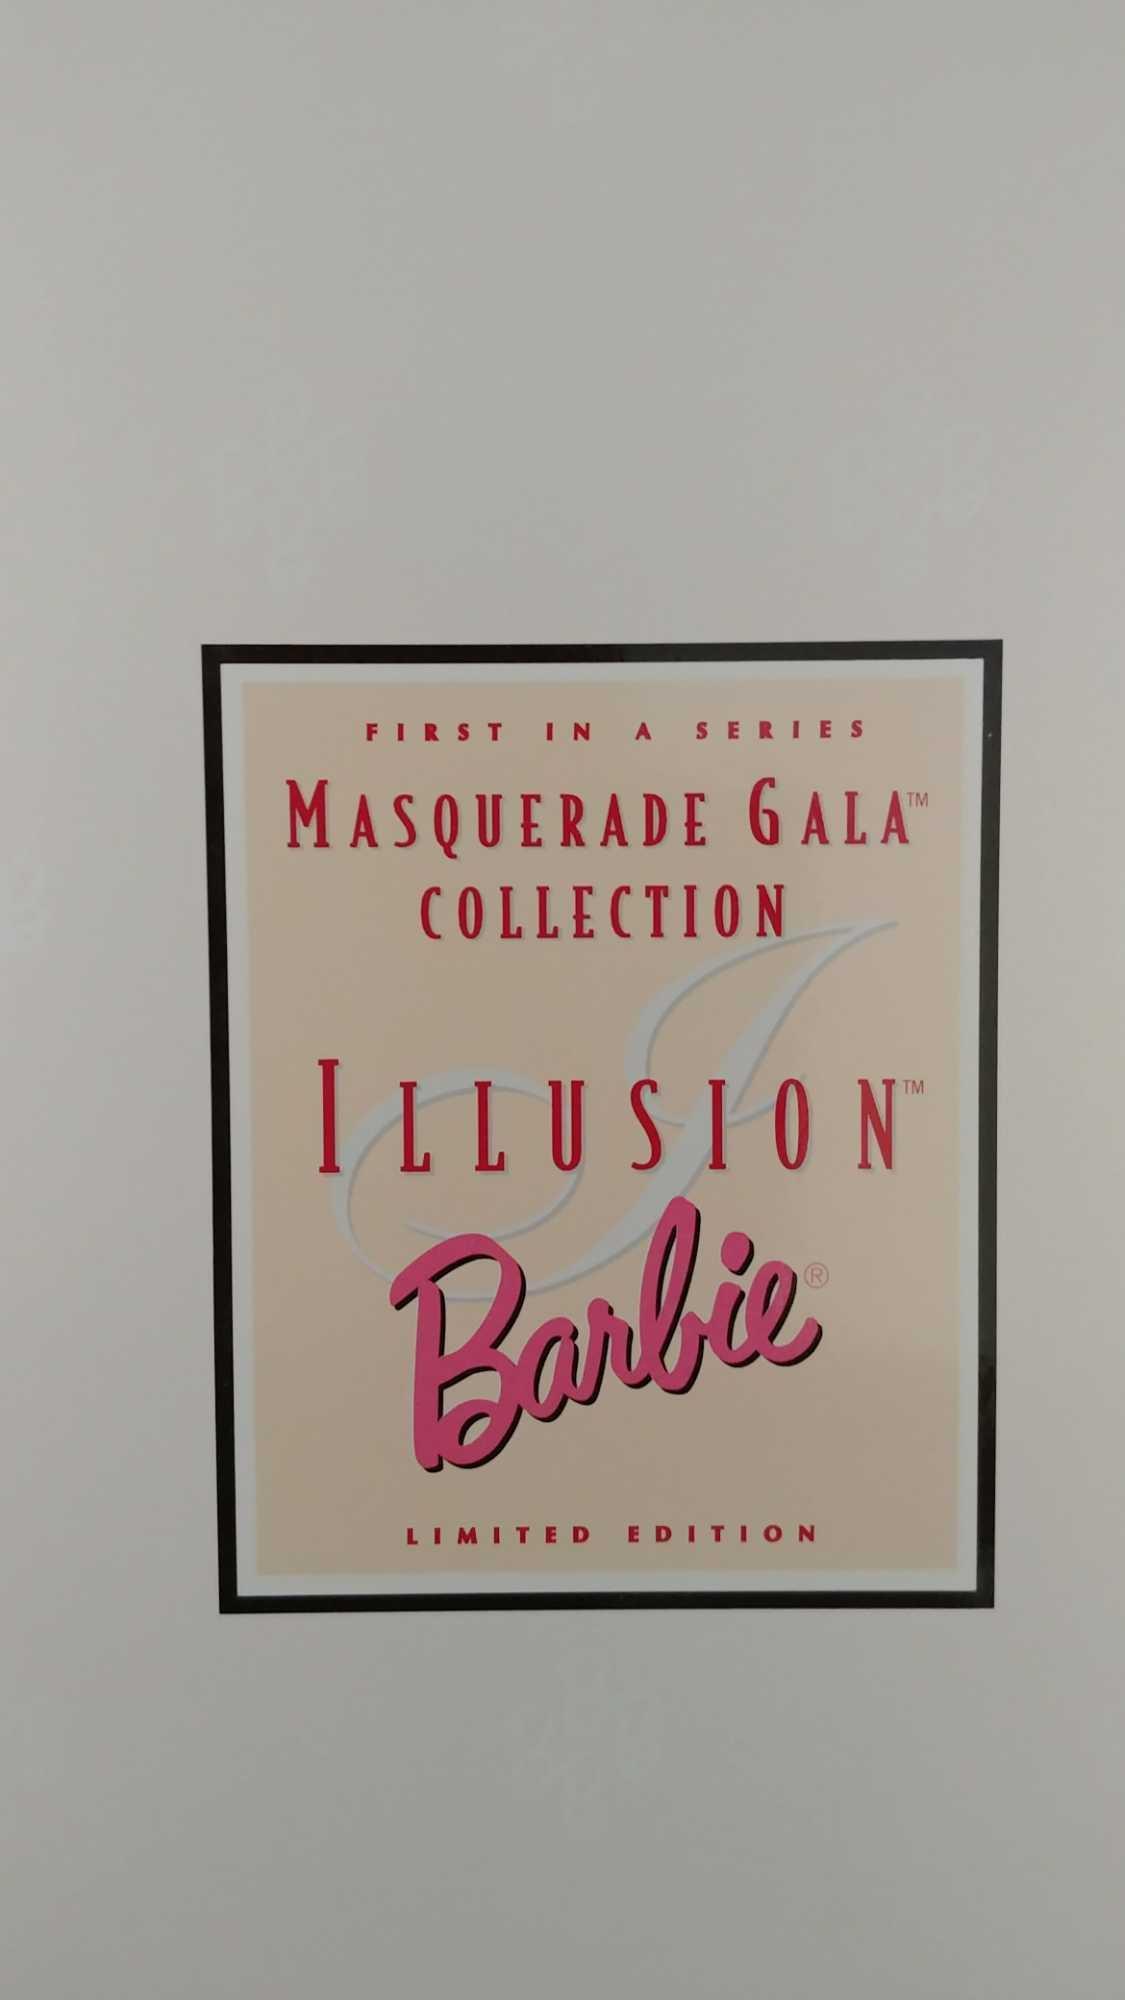 3 Masquerade Gala collection Barbies. Venetian Opulence, Rendezvous, and Illusion